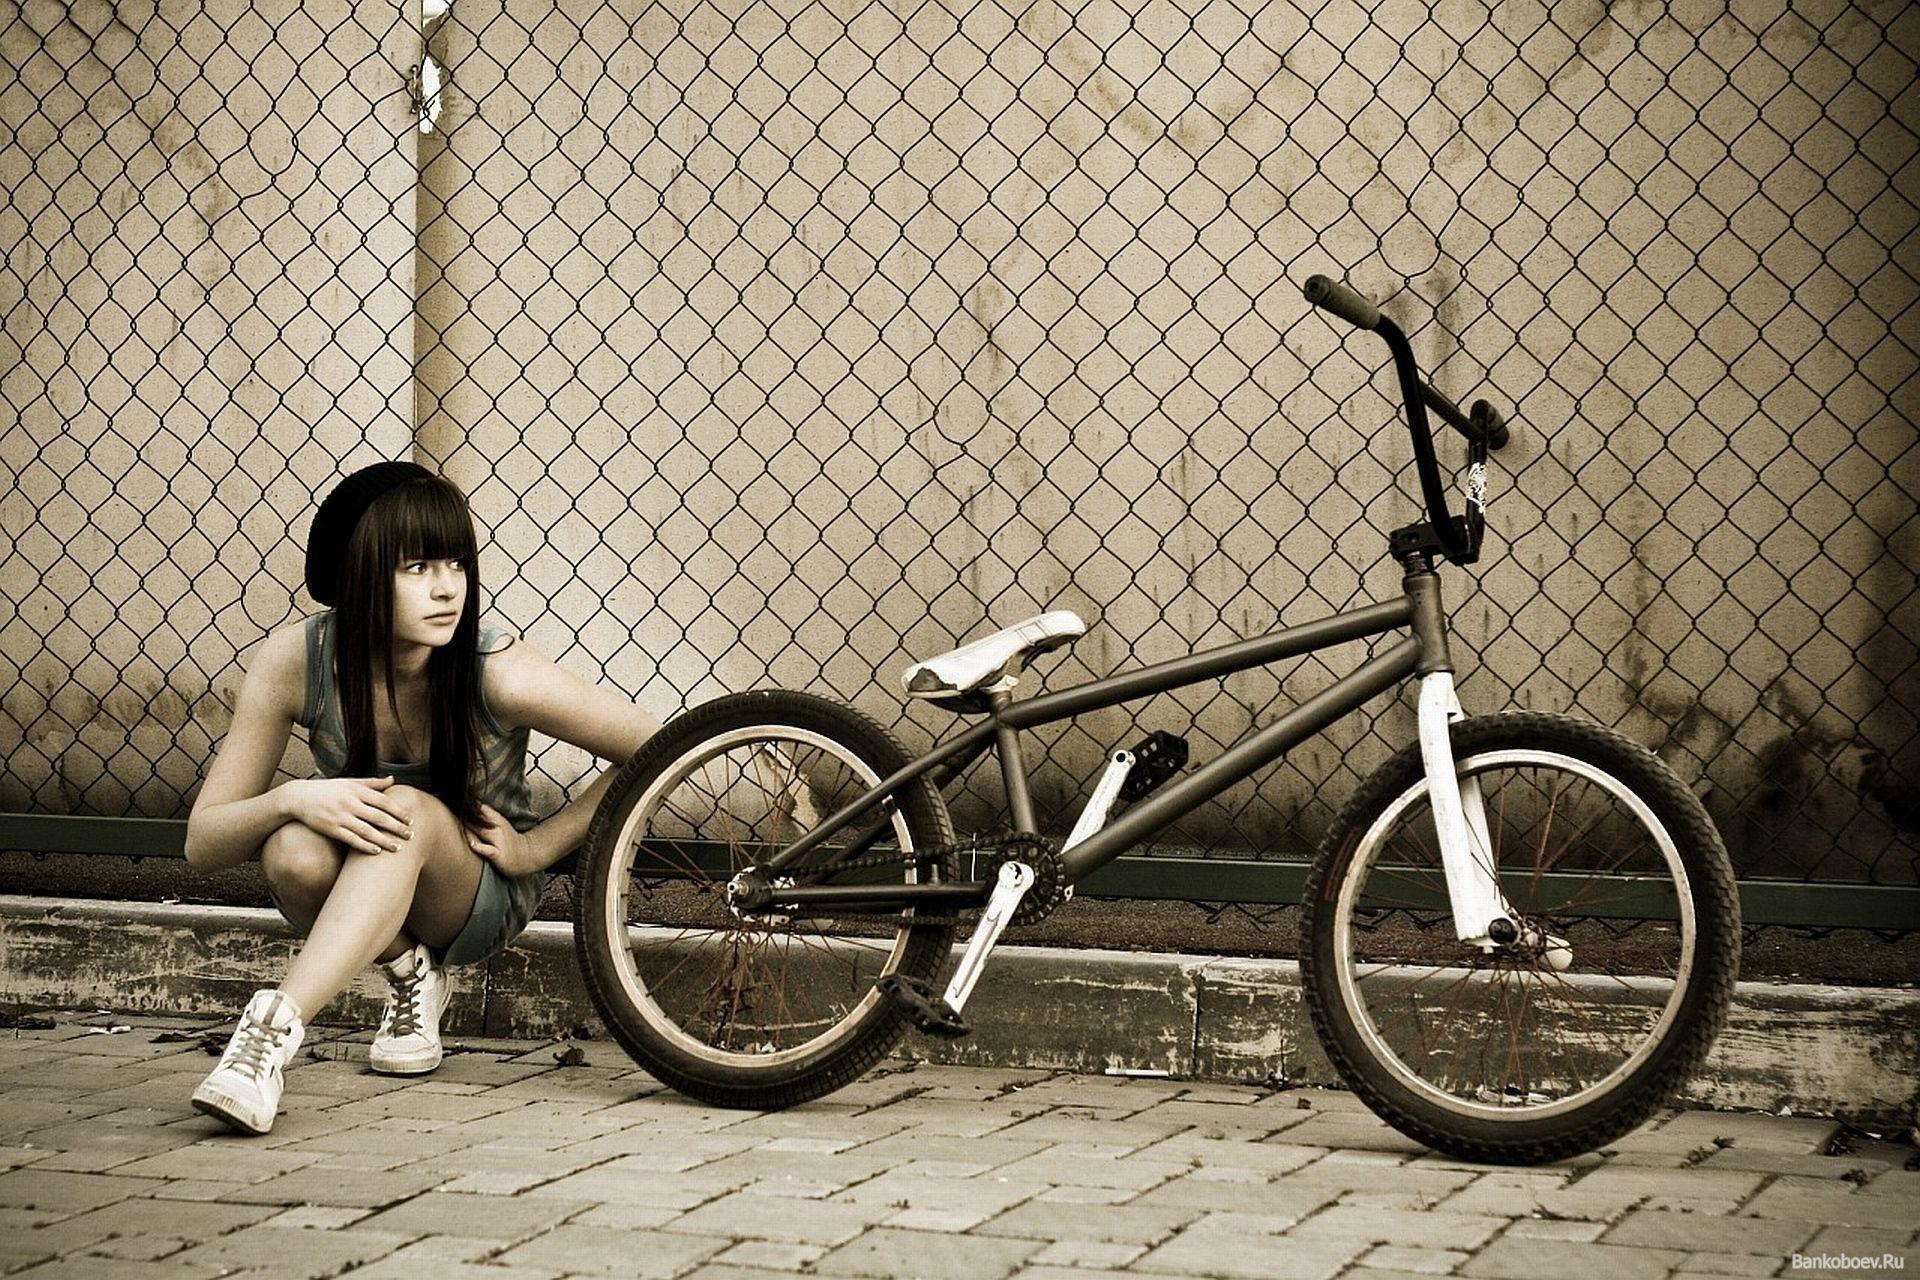 For: BMX Wallpaper, 1920x1280 px for PC & Mac, Laptop, Tablet